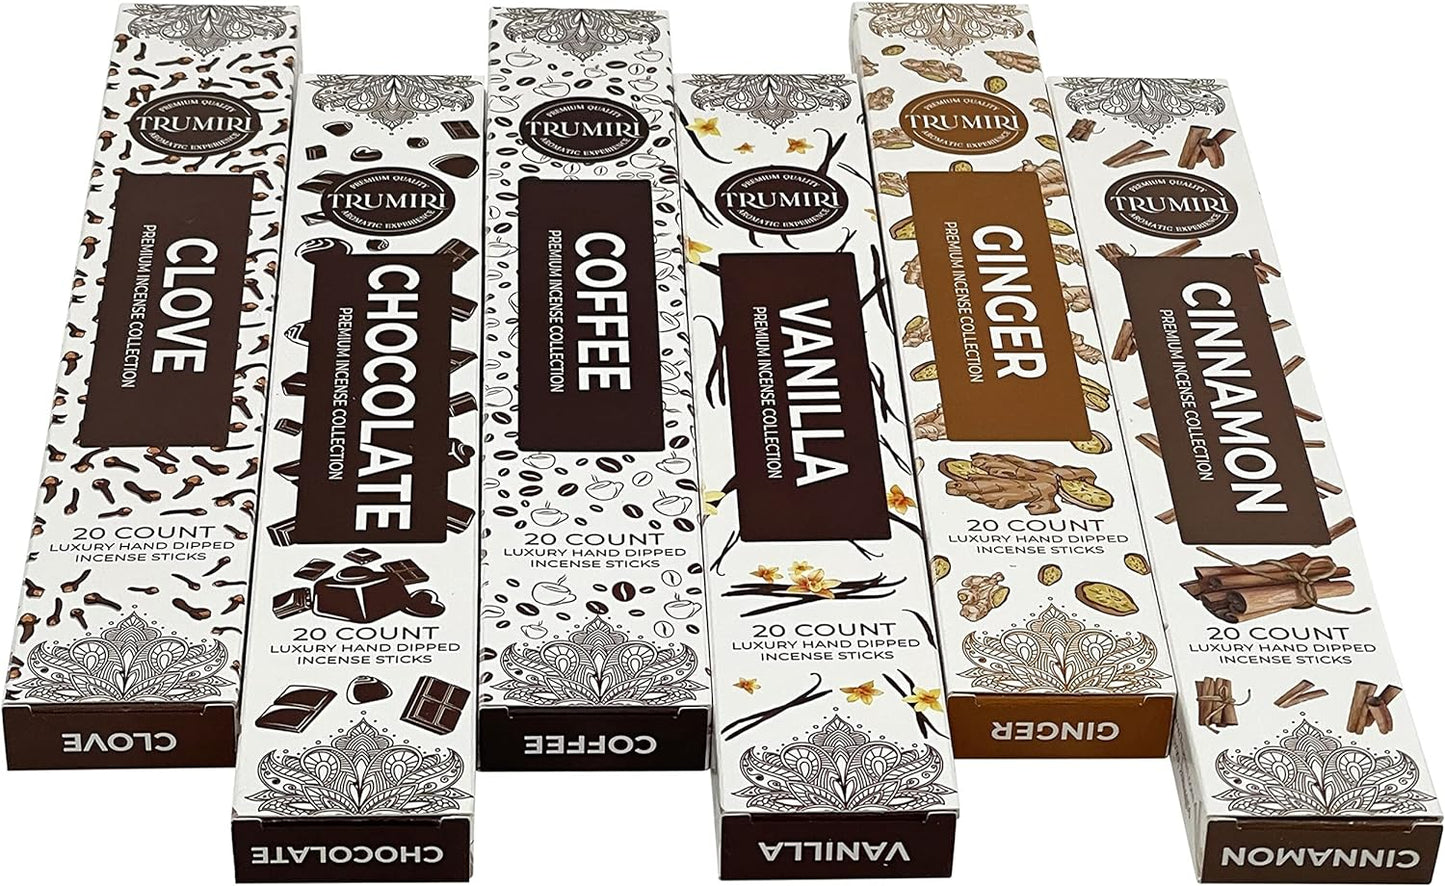 Gourmet Incense Sticks Variety Pack with Incense Holder